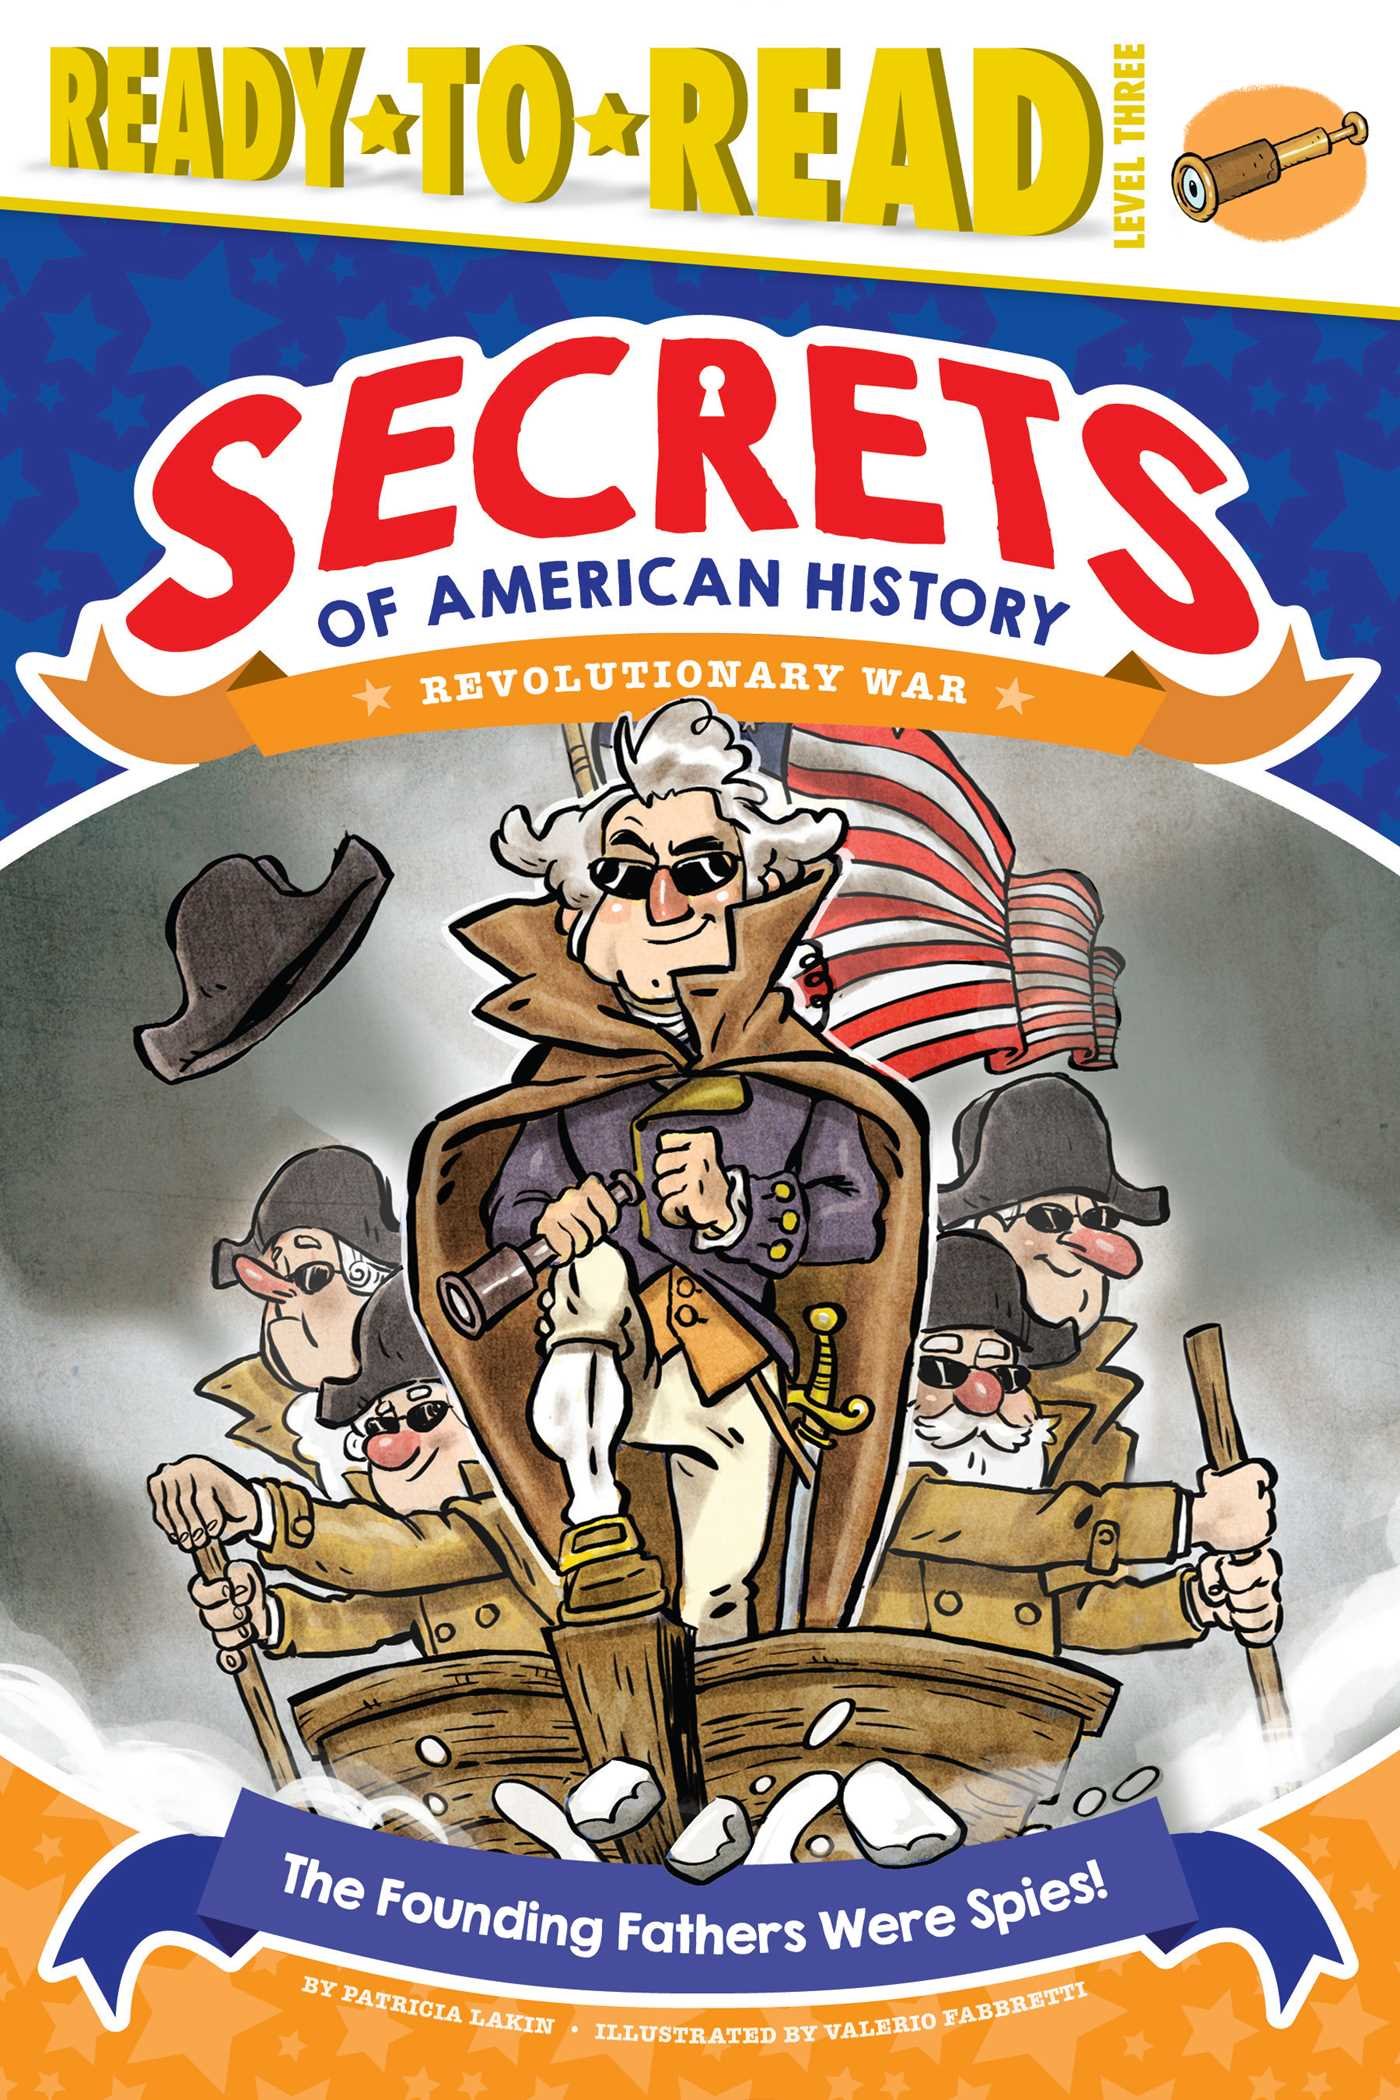 The Founding Fathers Were Spies!: Revolutionary War